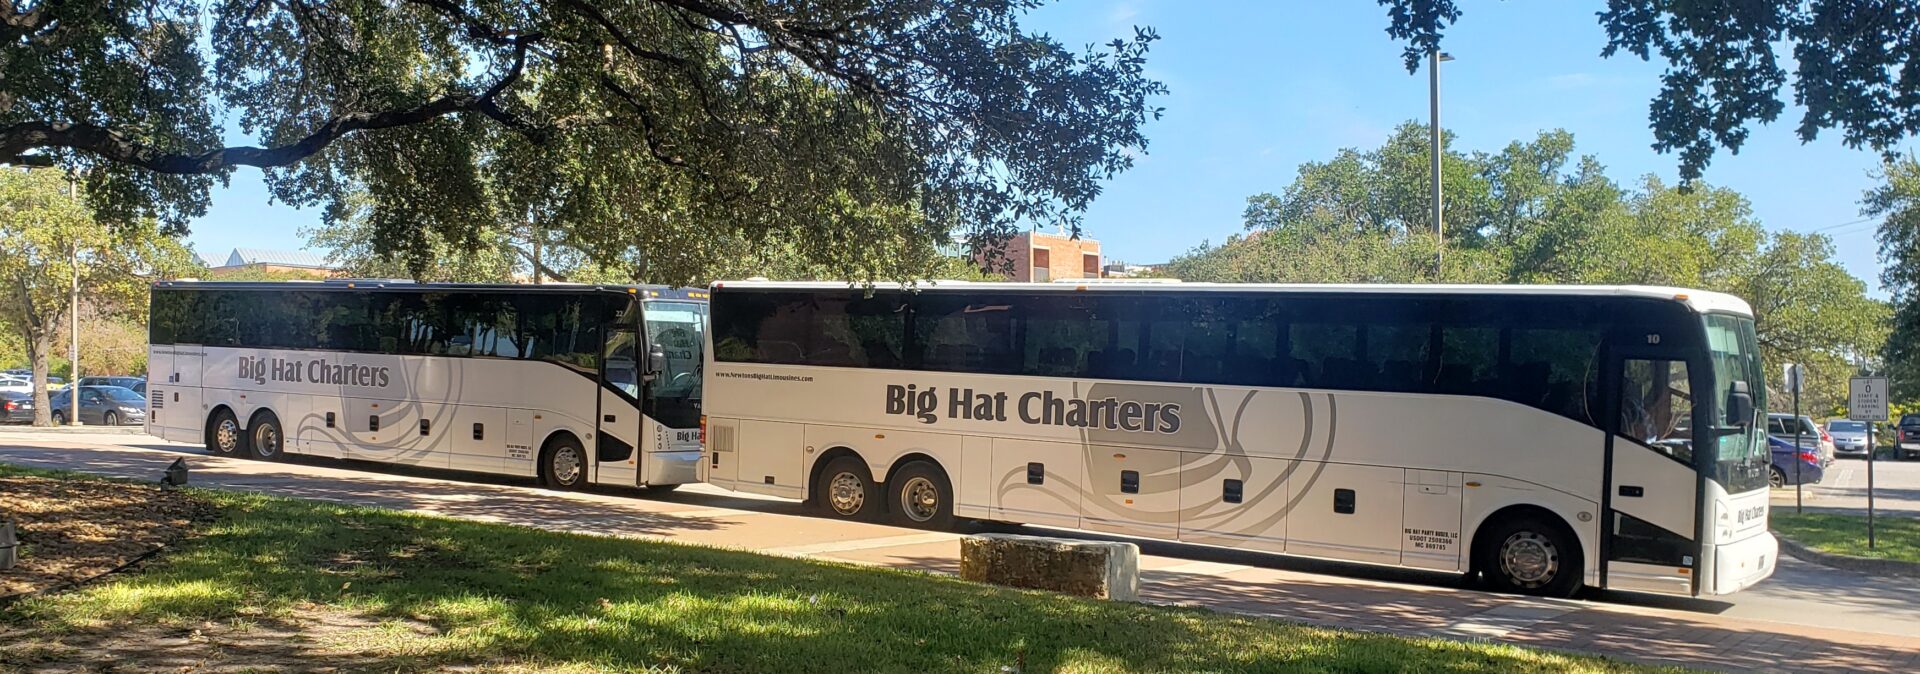 Two white Big Hat Charters buses parked.